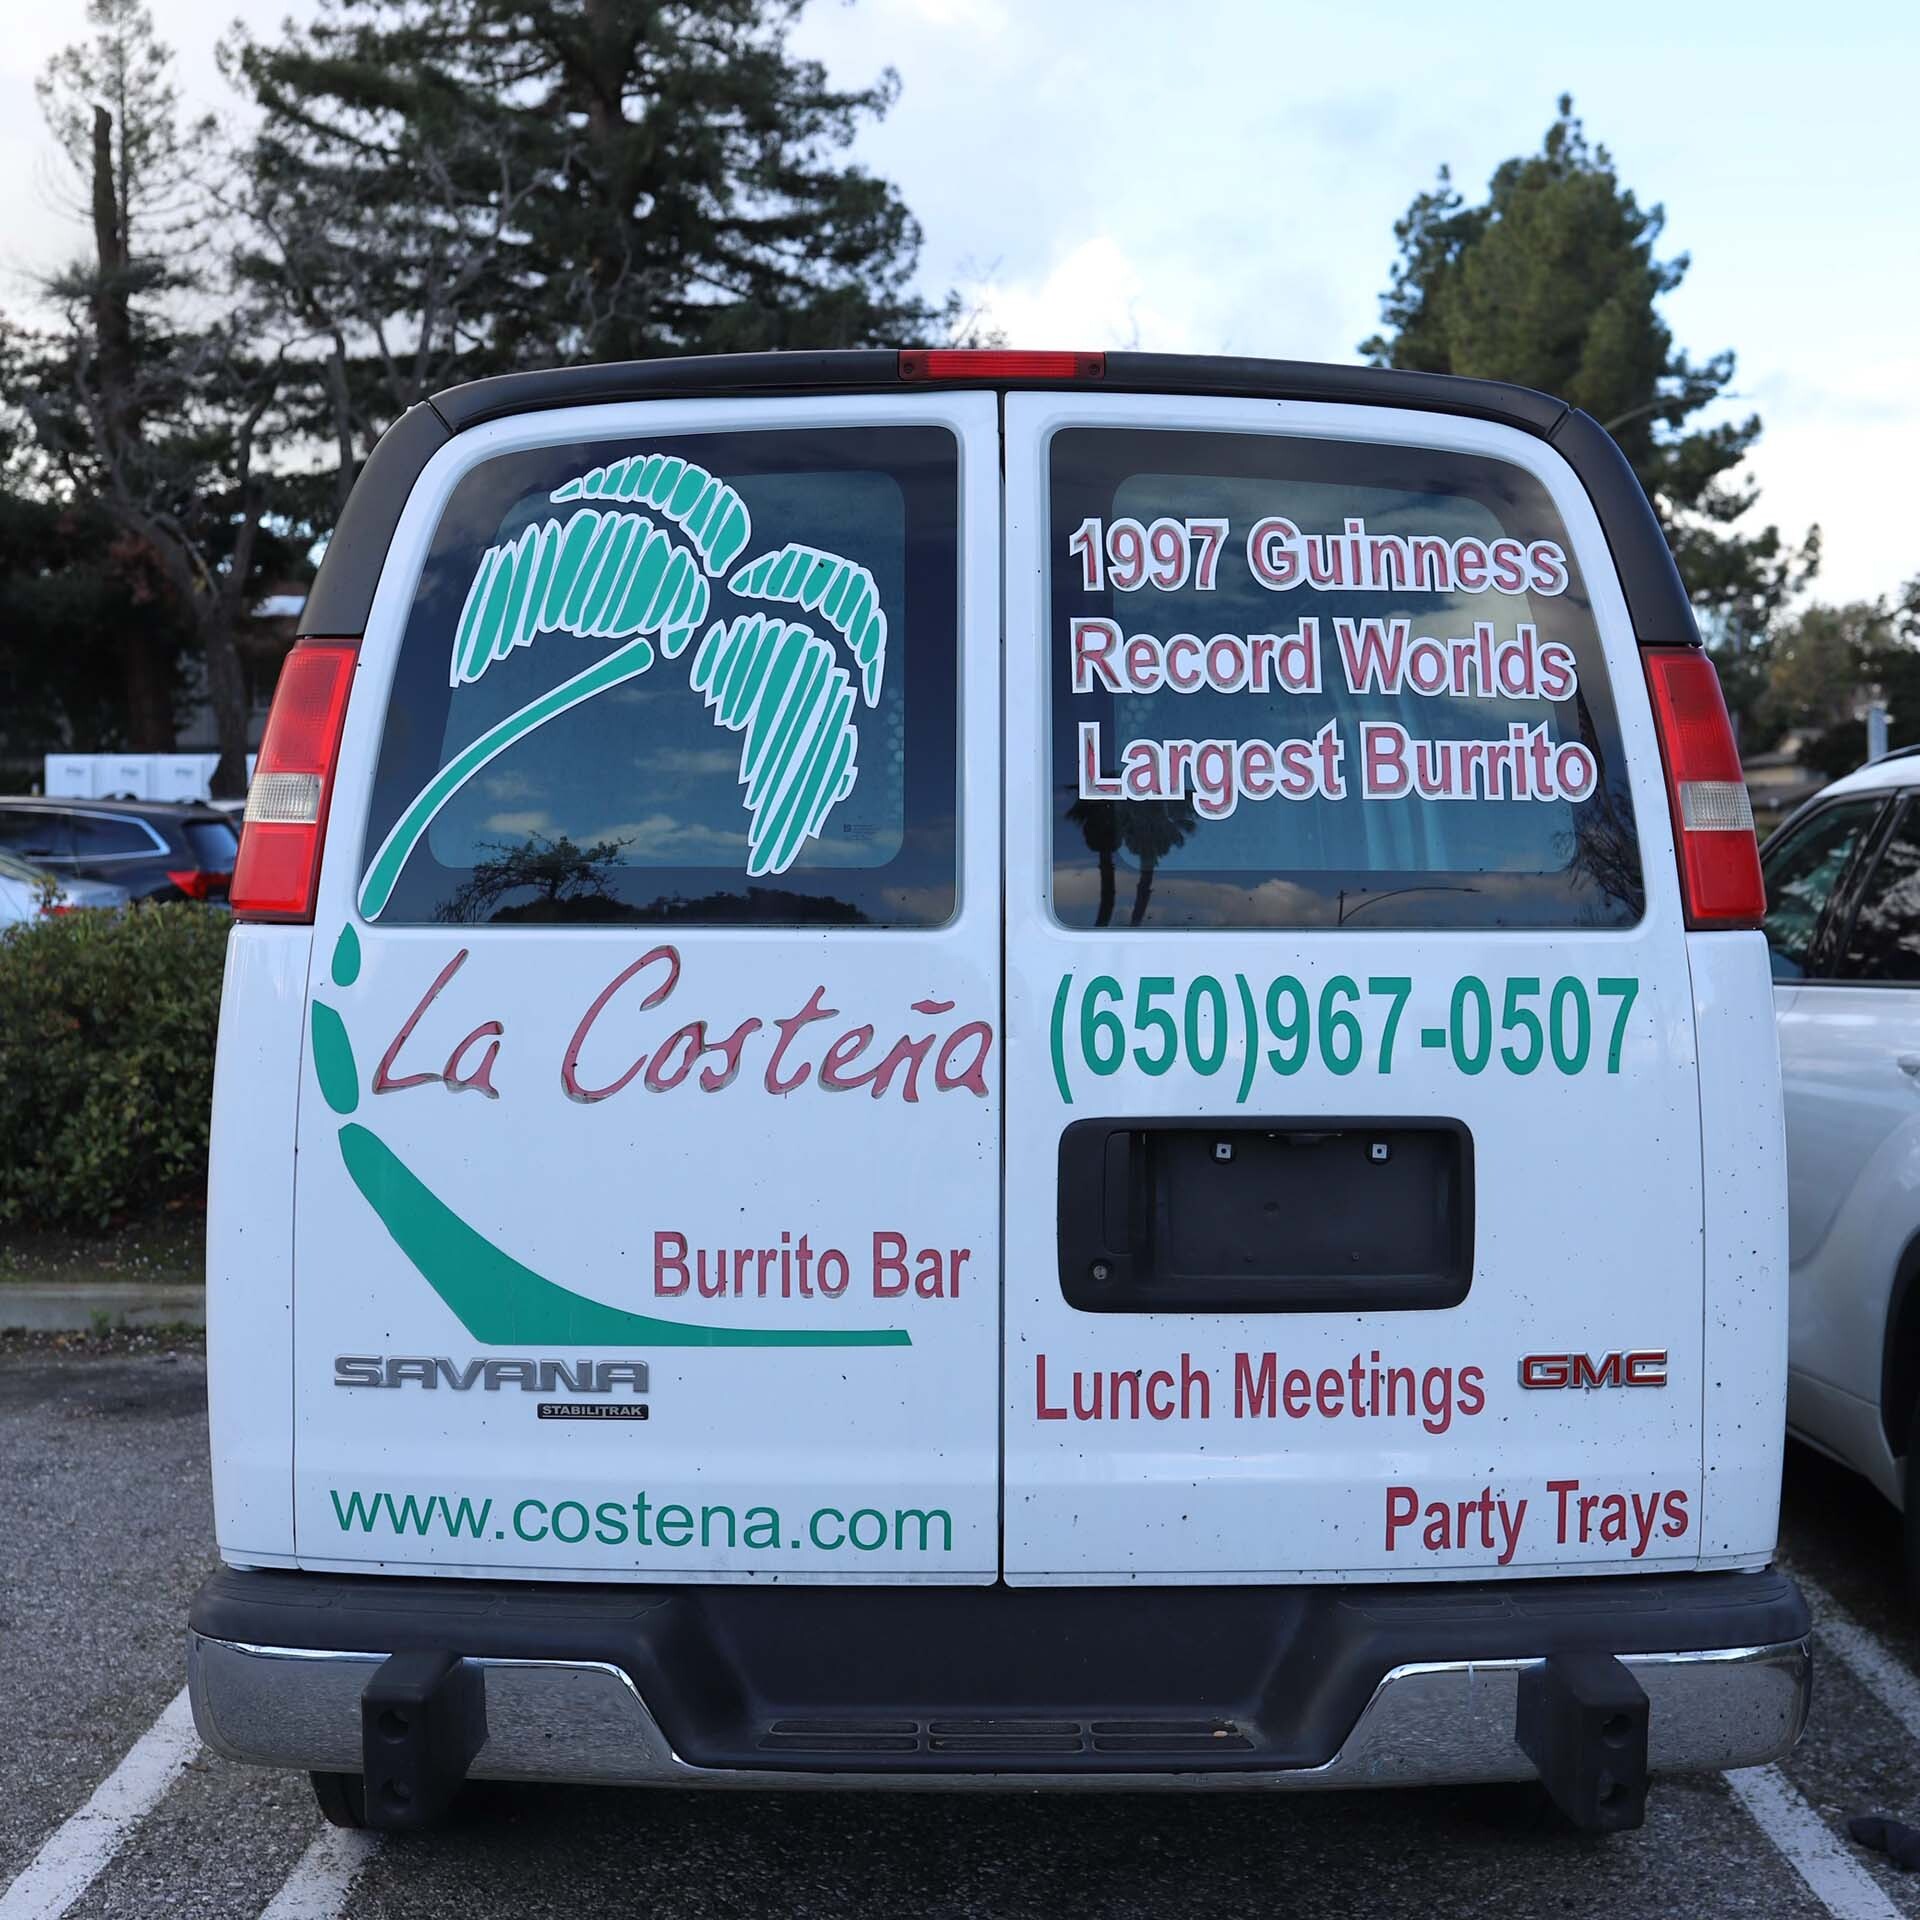 a van parked in a parking lot that displays a restaurant's claim to burrito fame in 1997